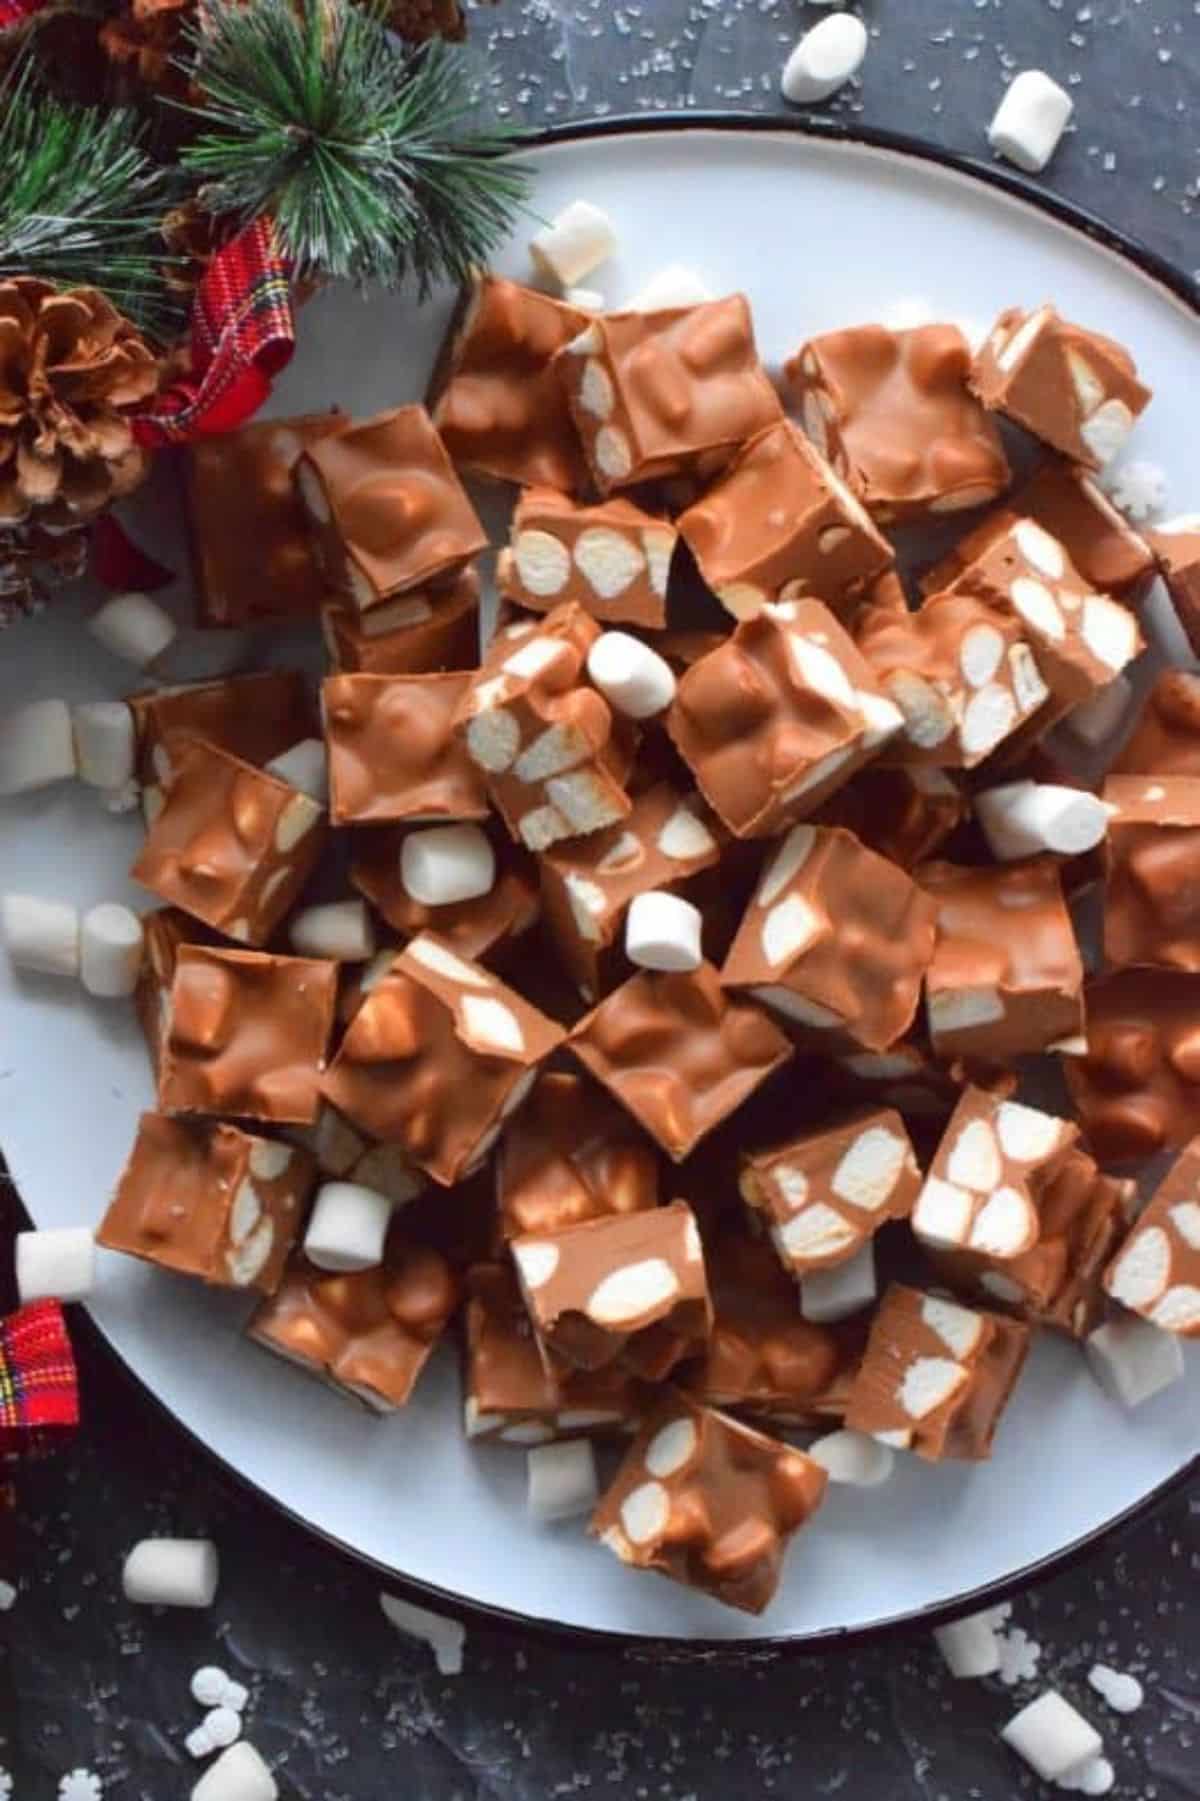 A pile of no bake chocolate marshmallow squares on a tray.